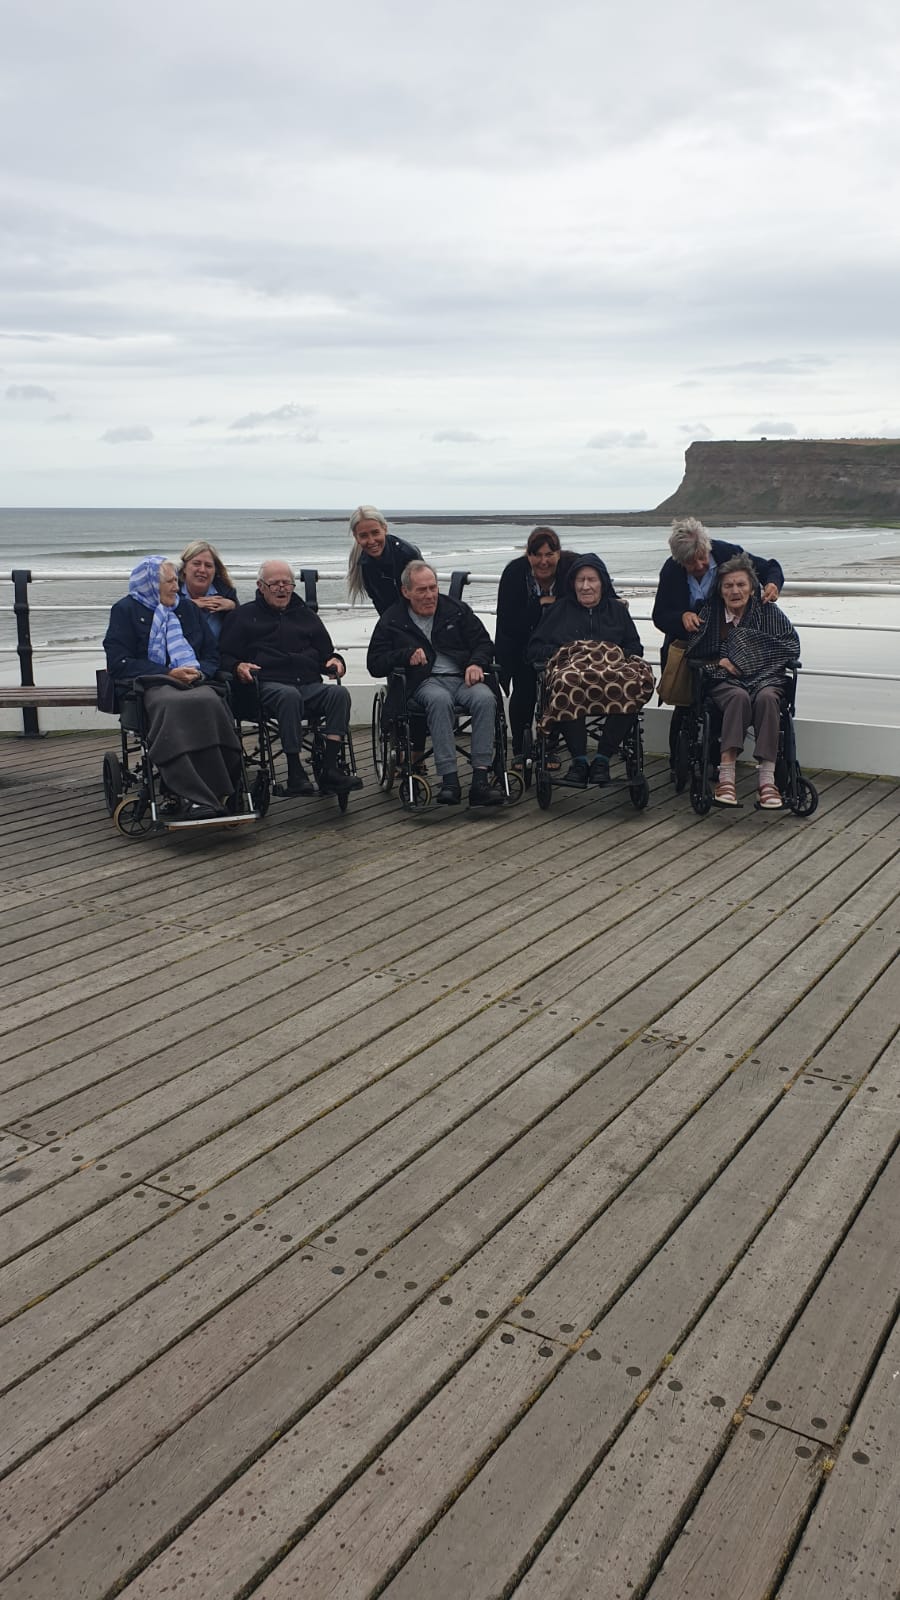 Victoria House Activities September 2019: Key Healthcare is dedicated to caring for elderly residents in safe. We have multiple dementia care homes including our care home middlesbrough, our care home St. Helen and care home saltburn. We excel in monitoring and improving care levels.